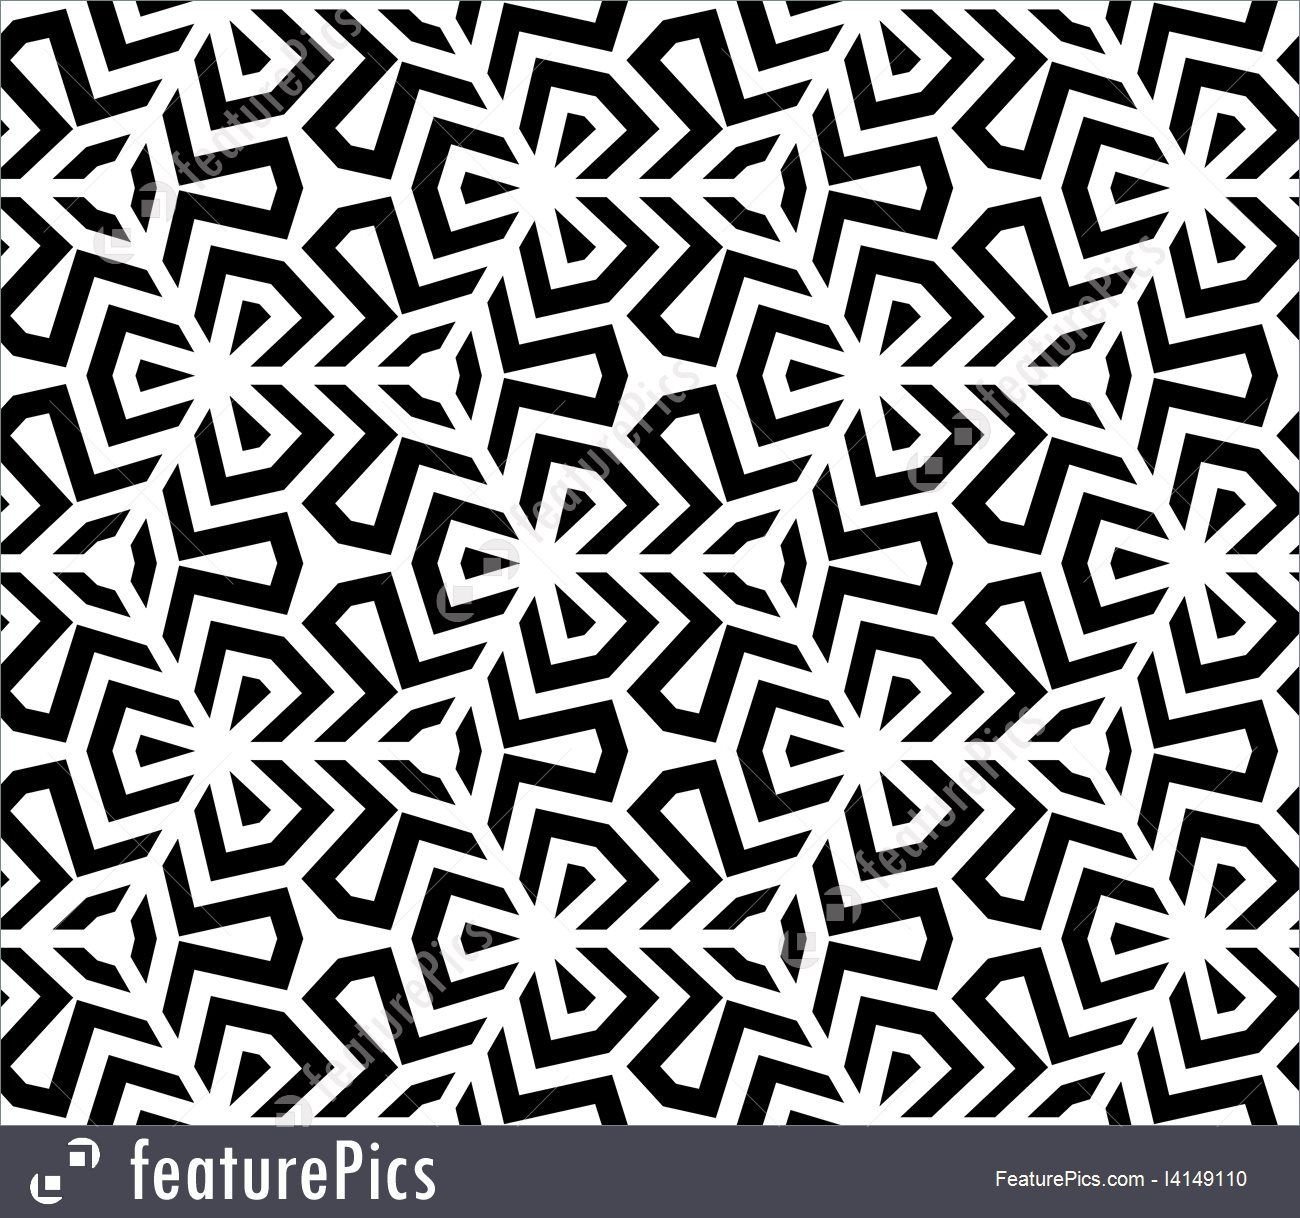 Patterns Black and White Abstract Patterns Seamless Black and White Geometric